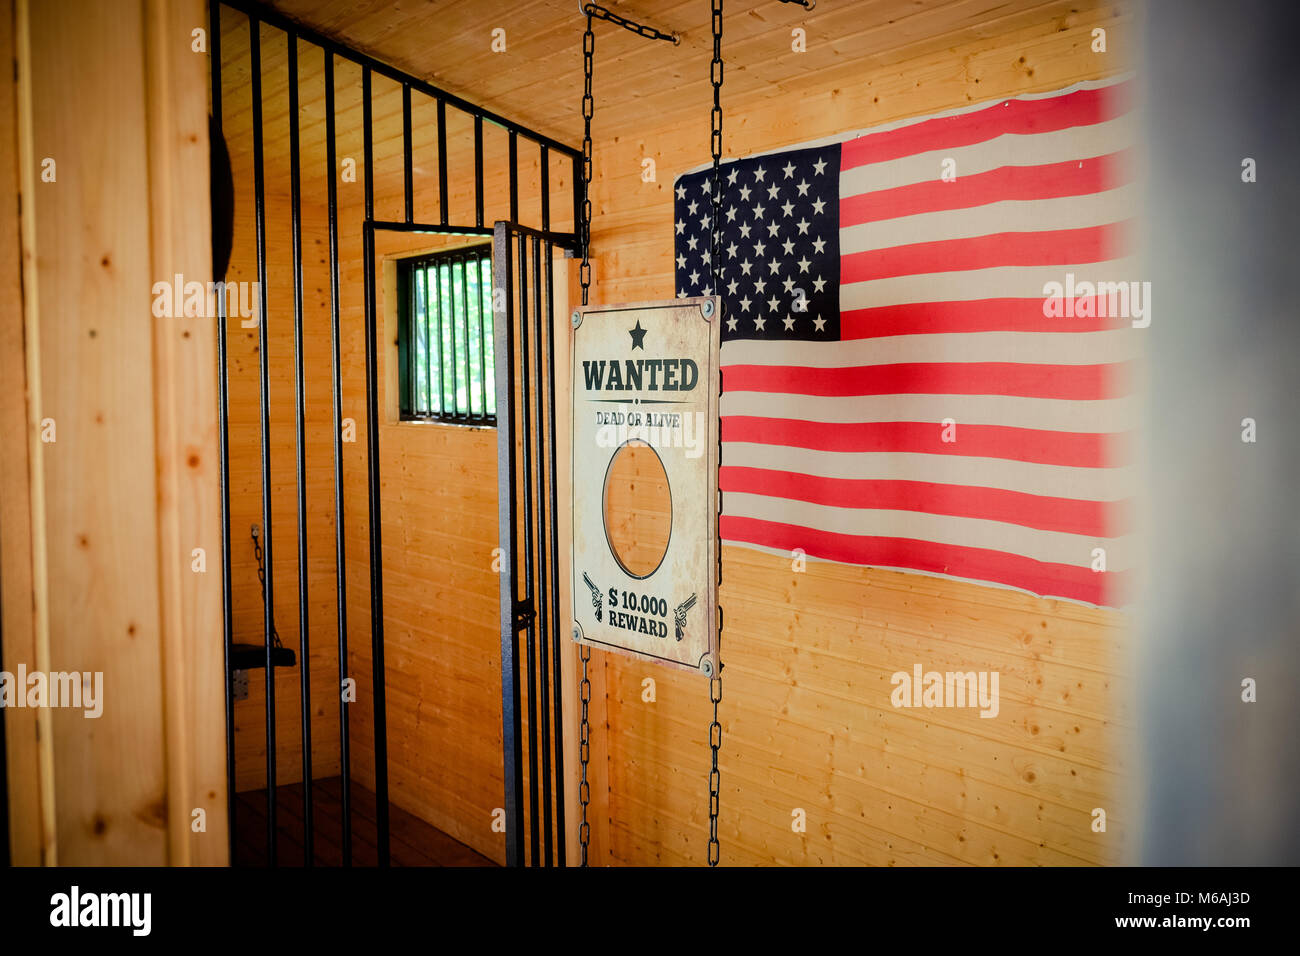 Wild West jail door and wanted sign with american flag in the background Stock Photo